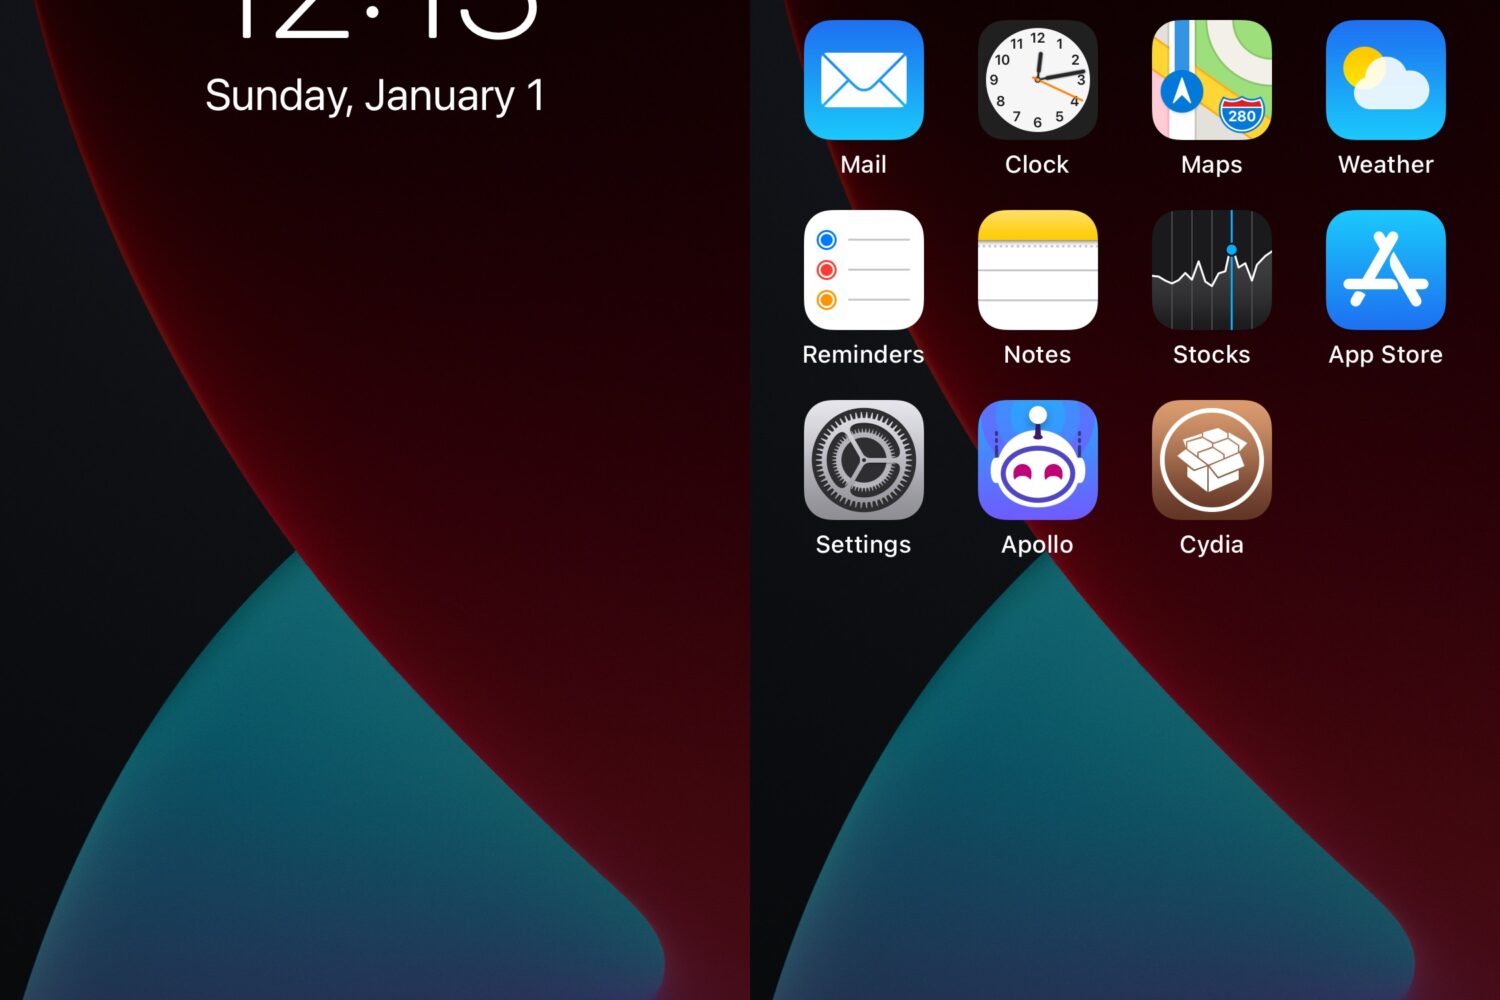 The dim it jailbreak tweak dims the background of the Home and Lock screens.